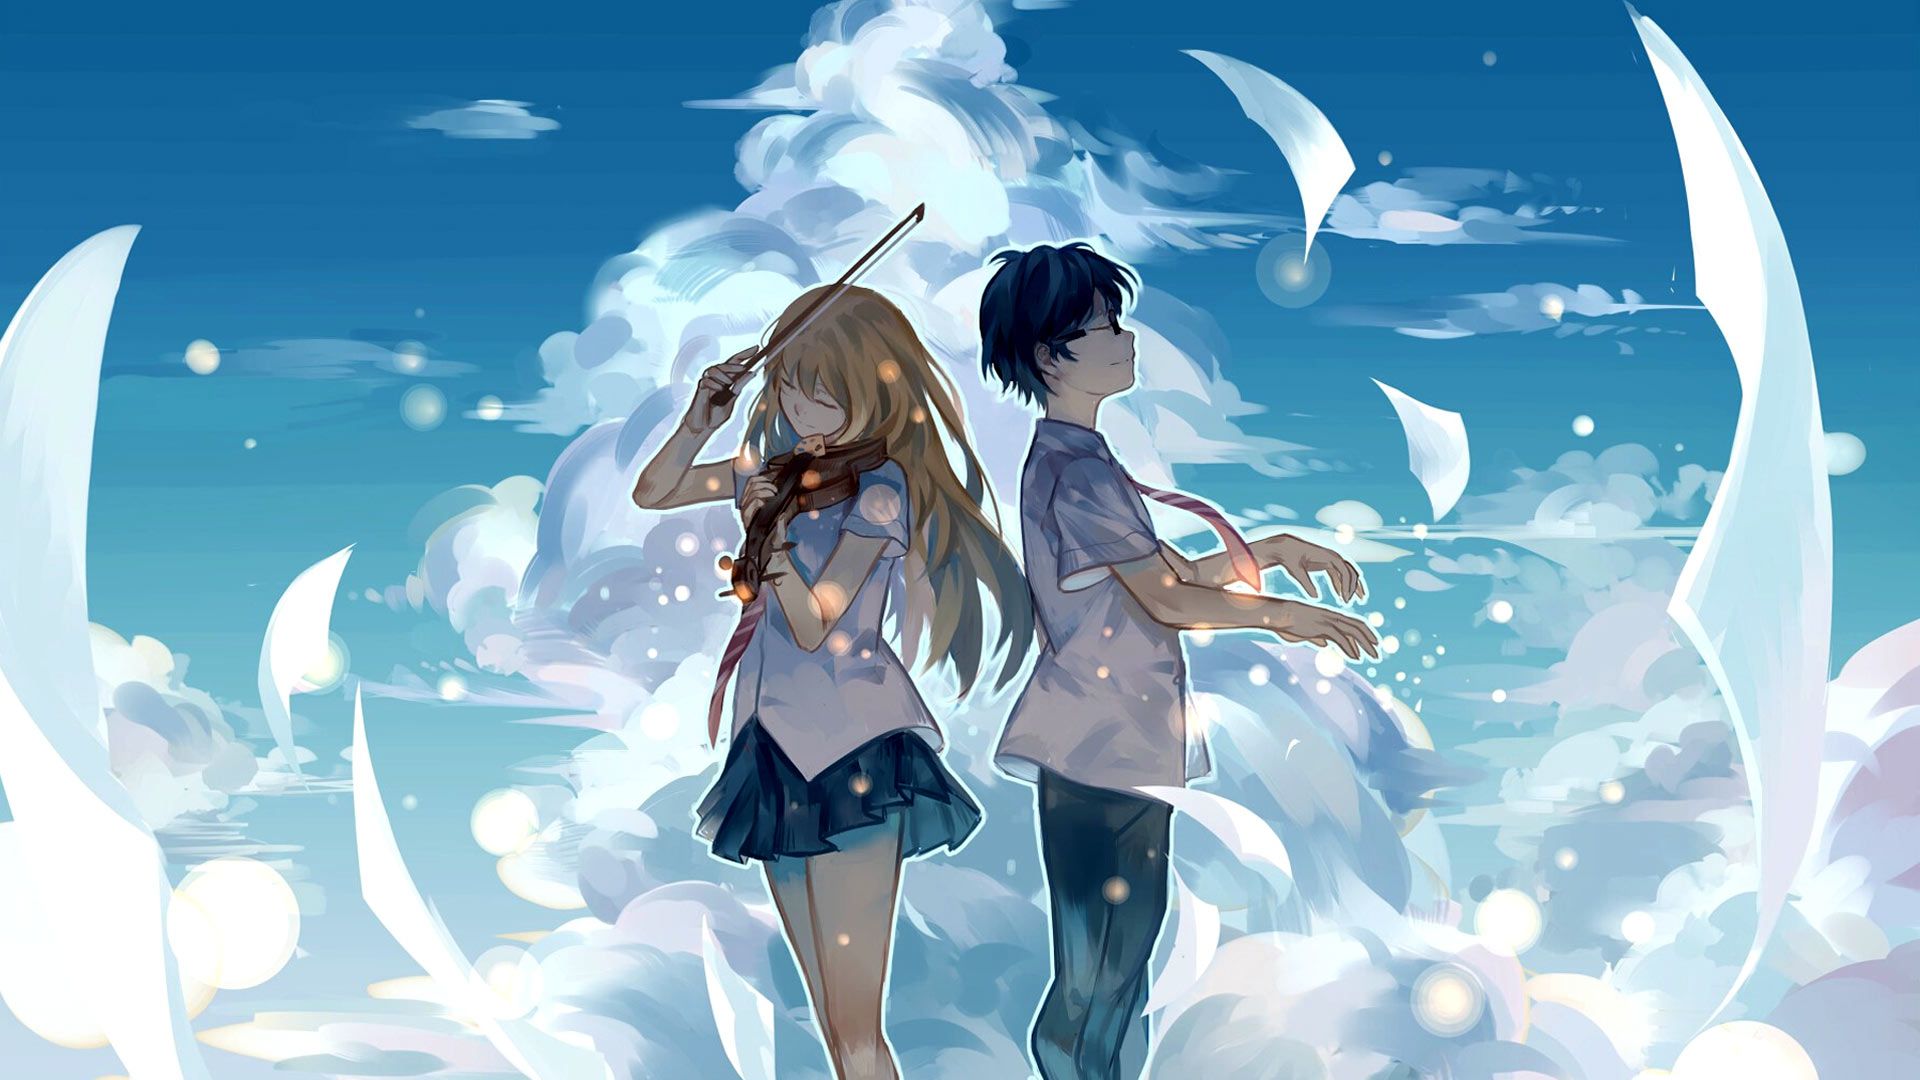 Your lie in april anime wallpaper – Free full hd wallpapers for ...